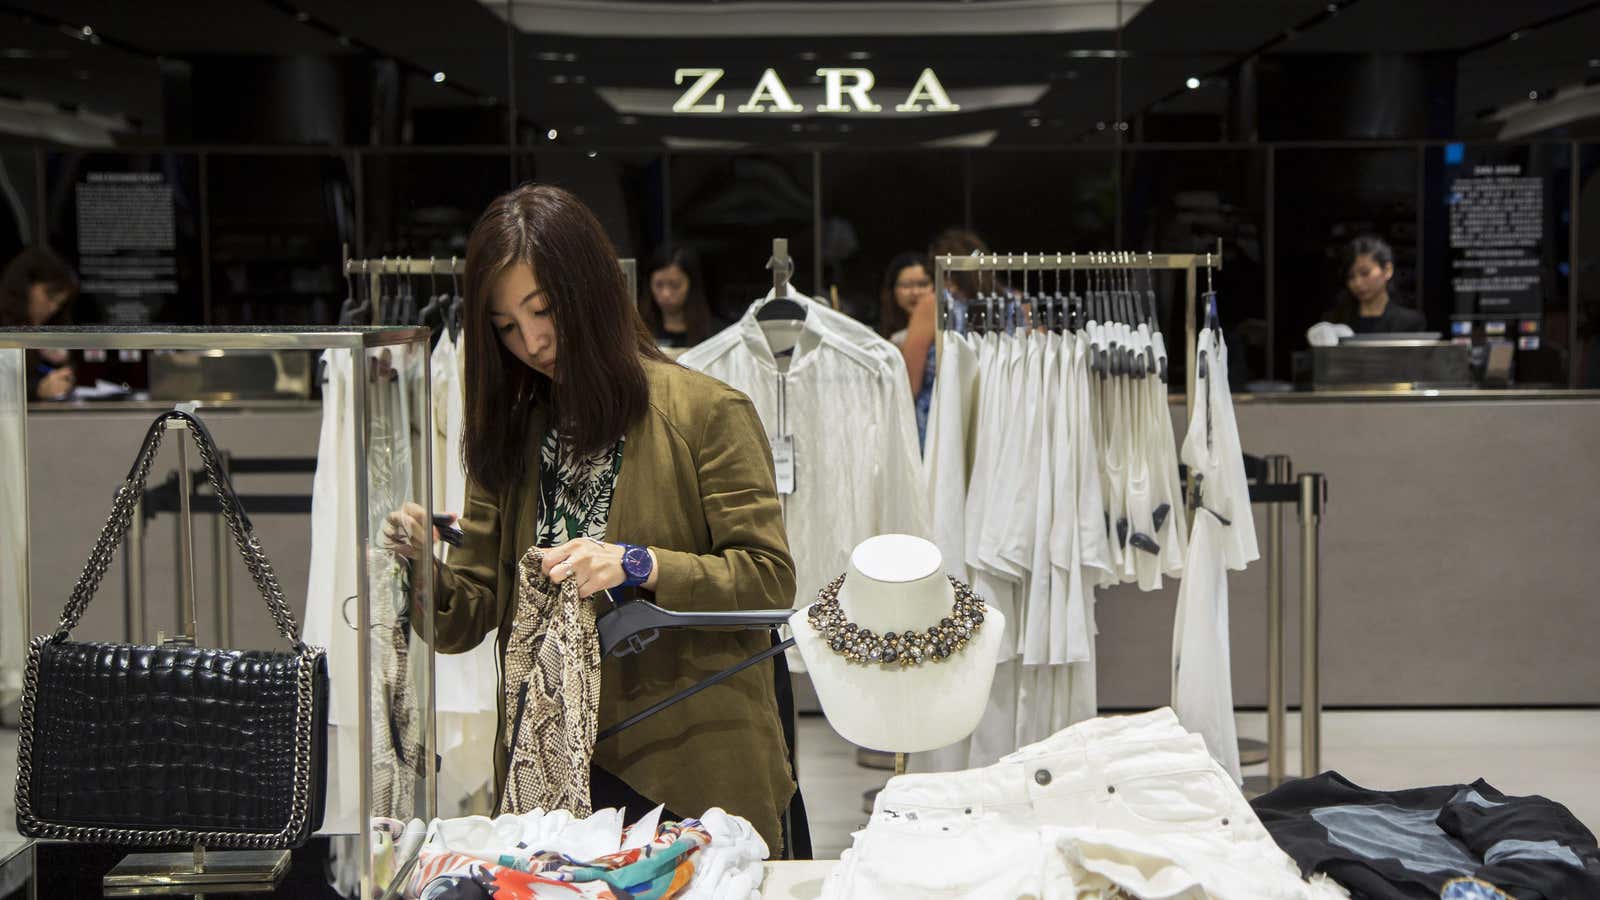 Is Zara fearful of blowback over a statement on Xinjiang?